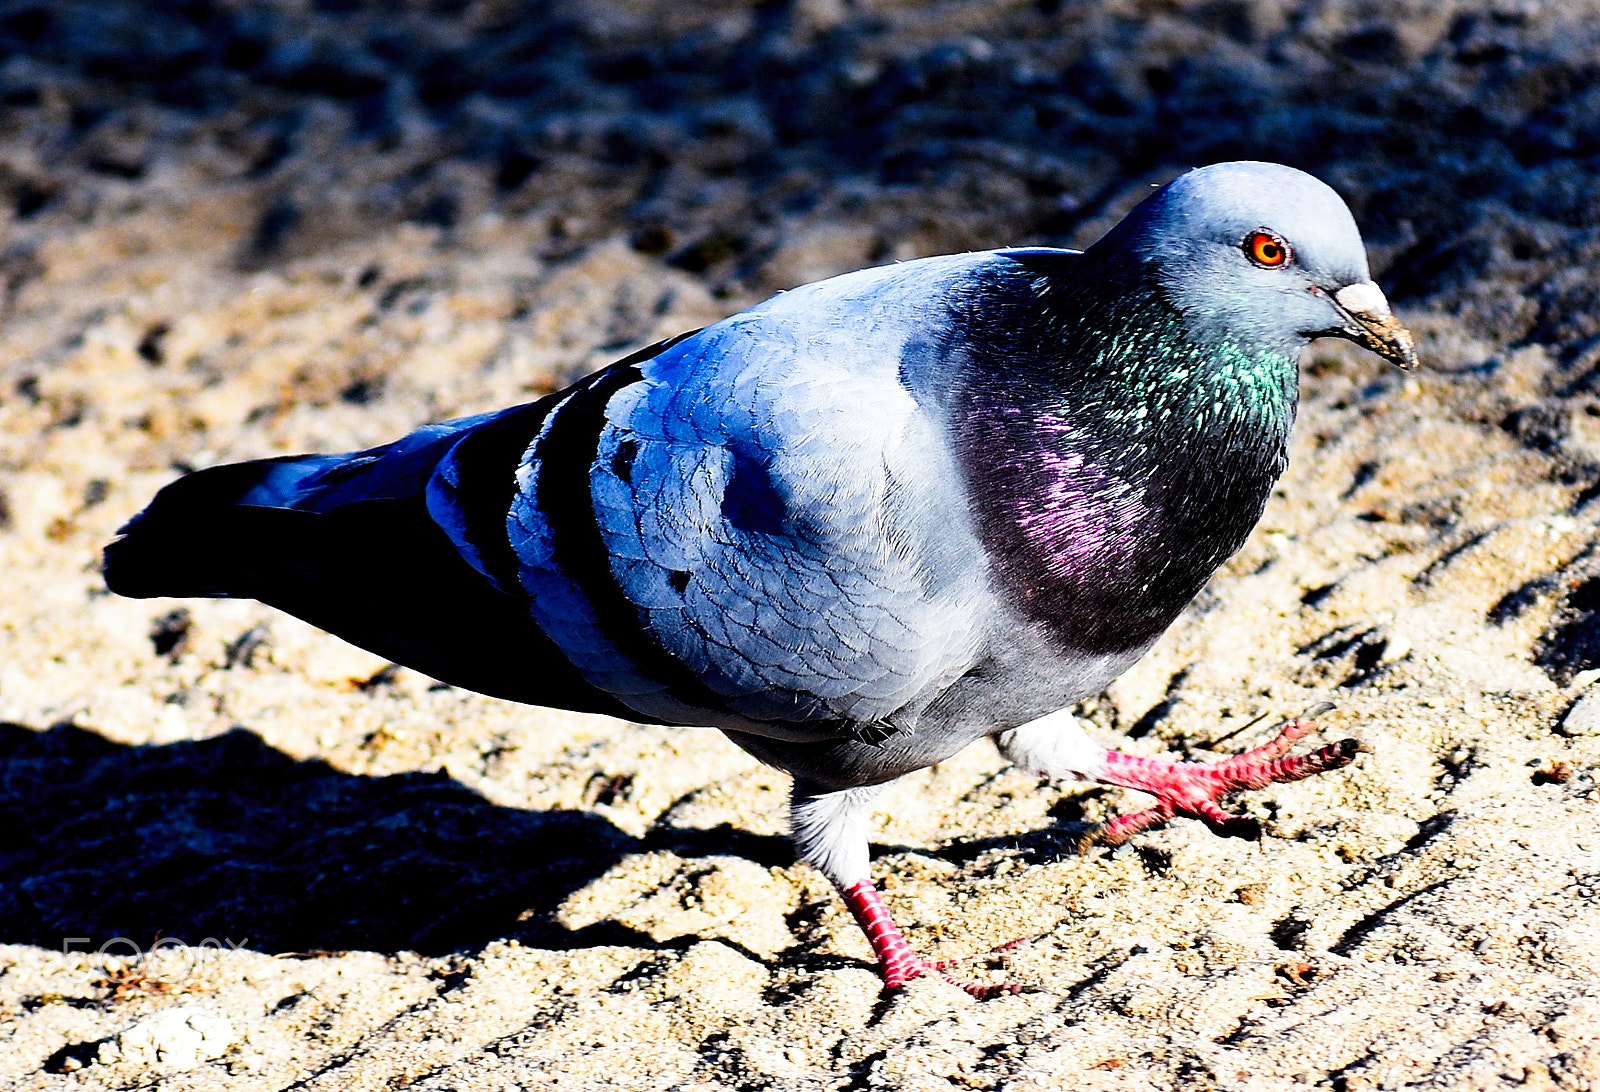 Nikon D7200 sample photo. Pigeon walking in the photography